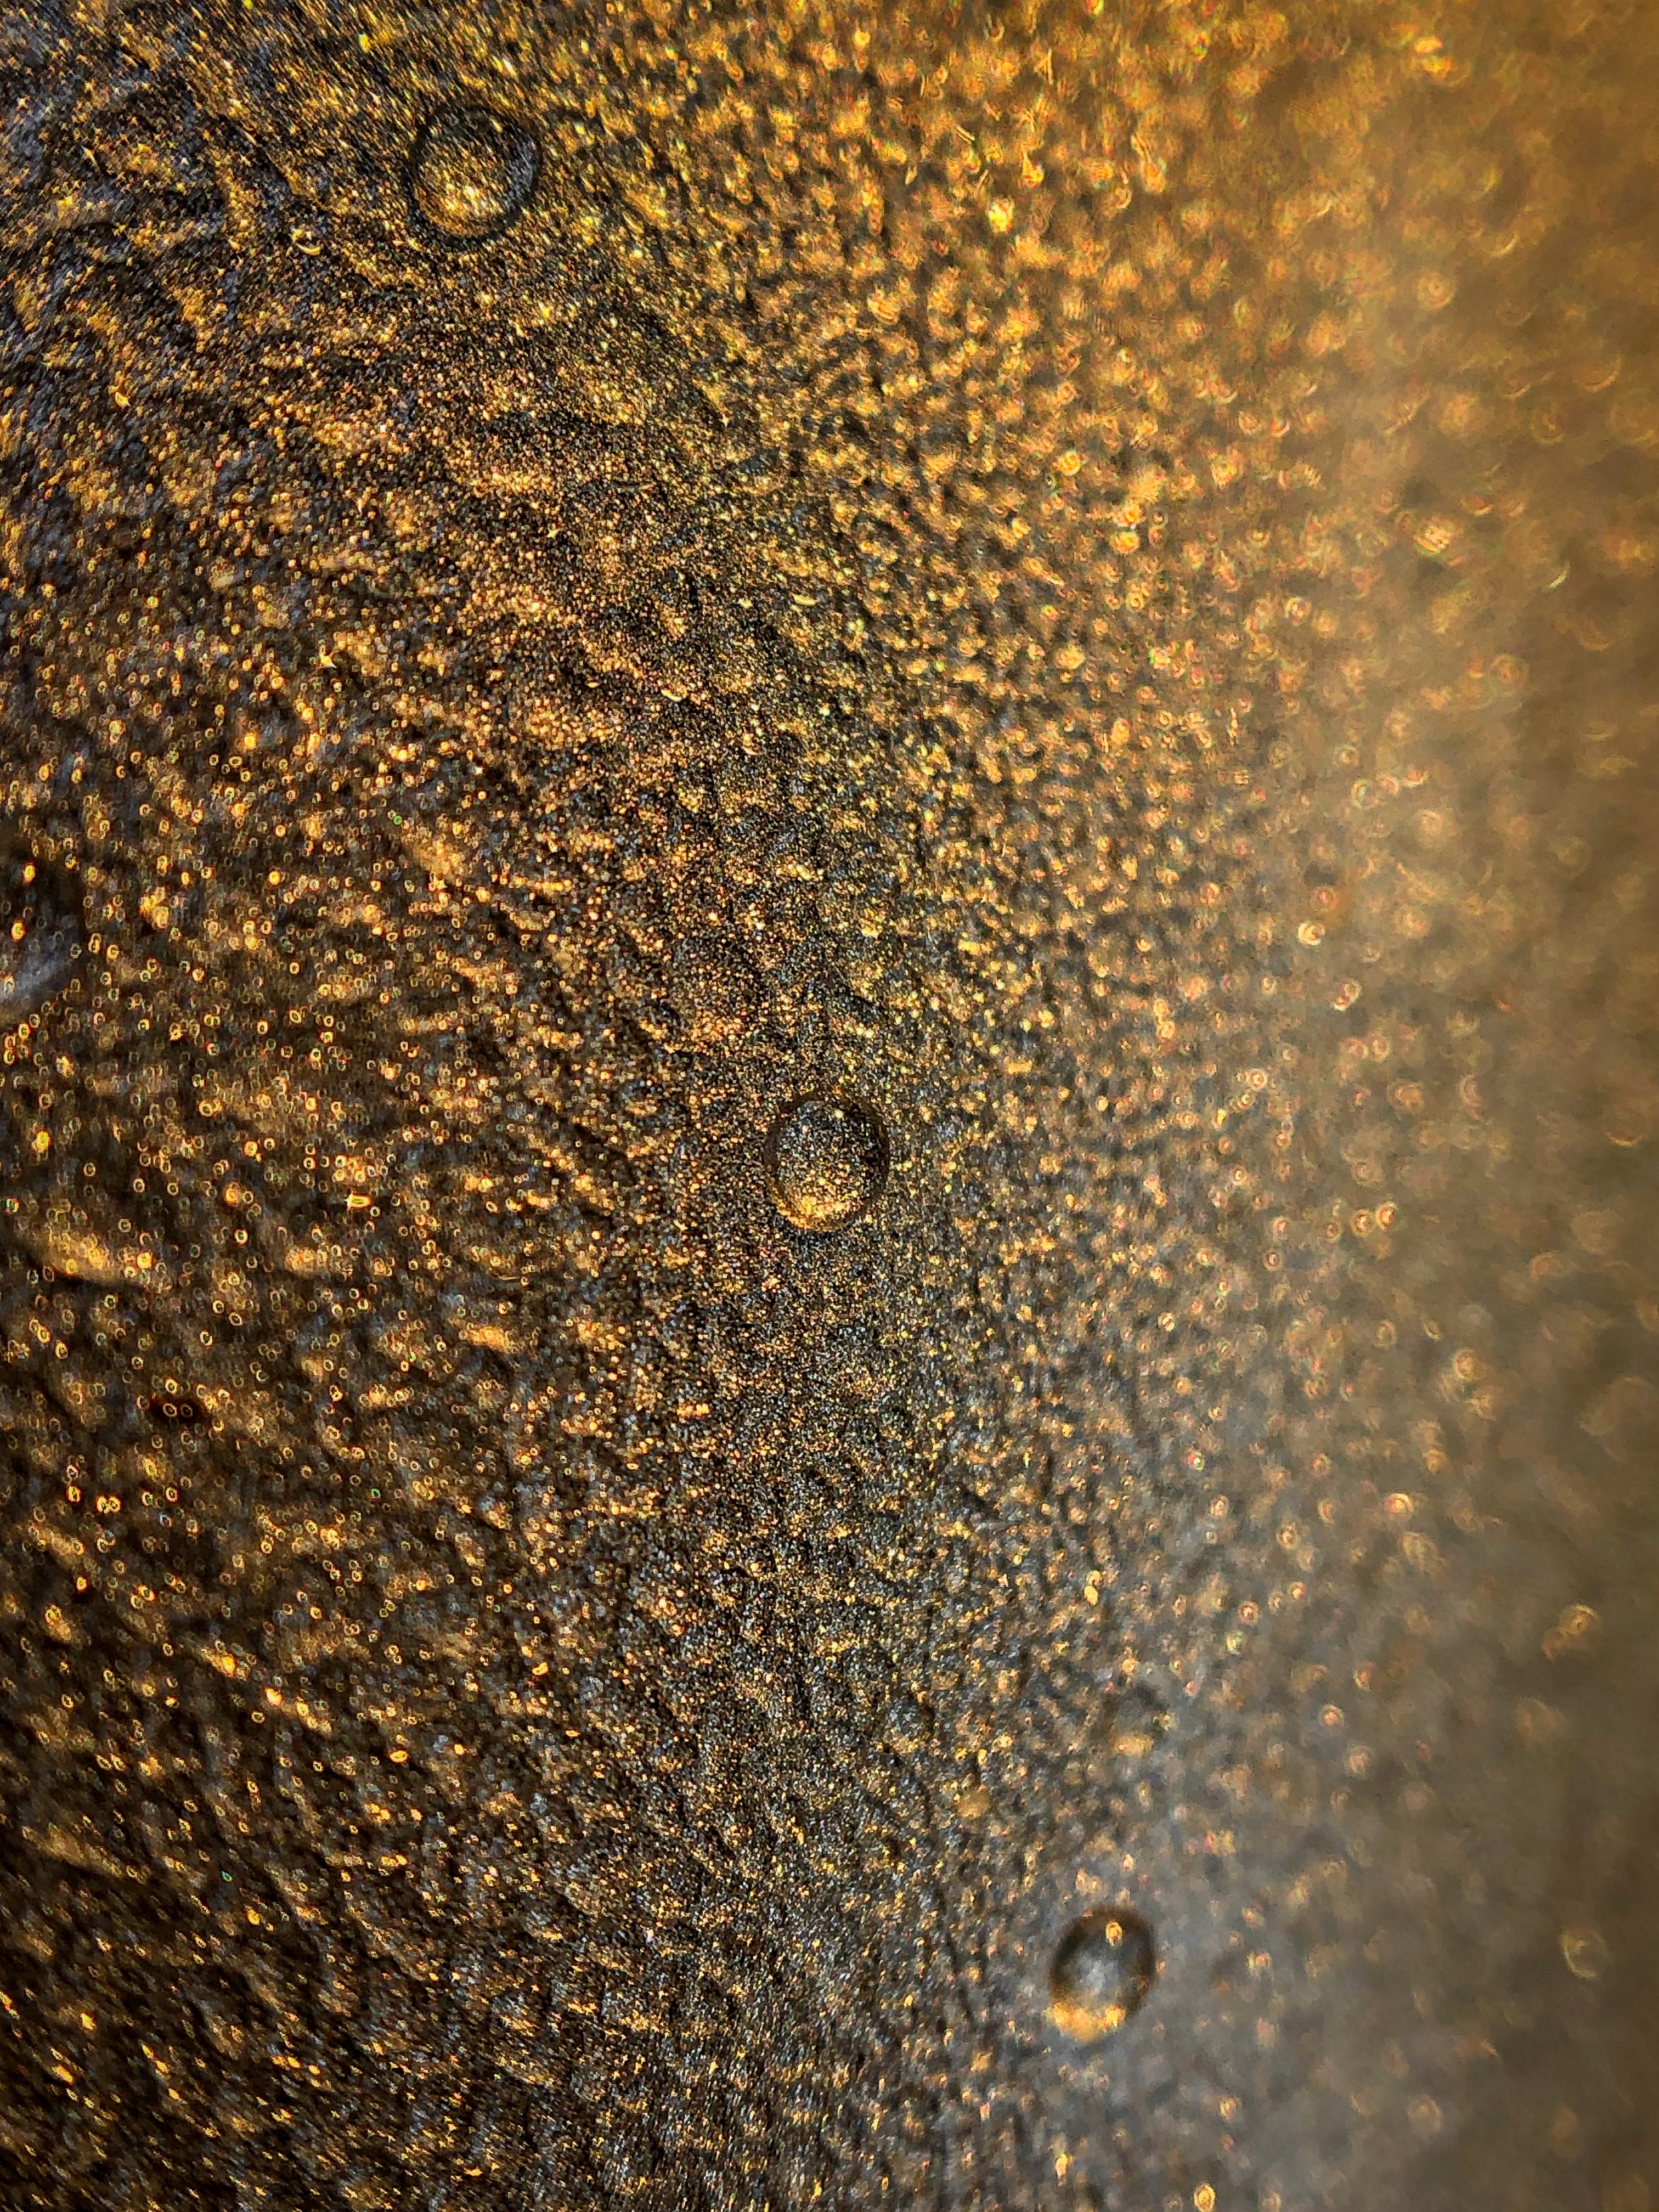 android gold, miscellaneous, blur, water, drops, miscellanea, smooth, surface